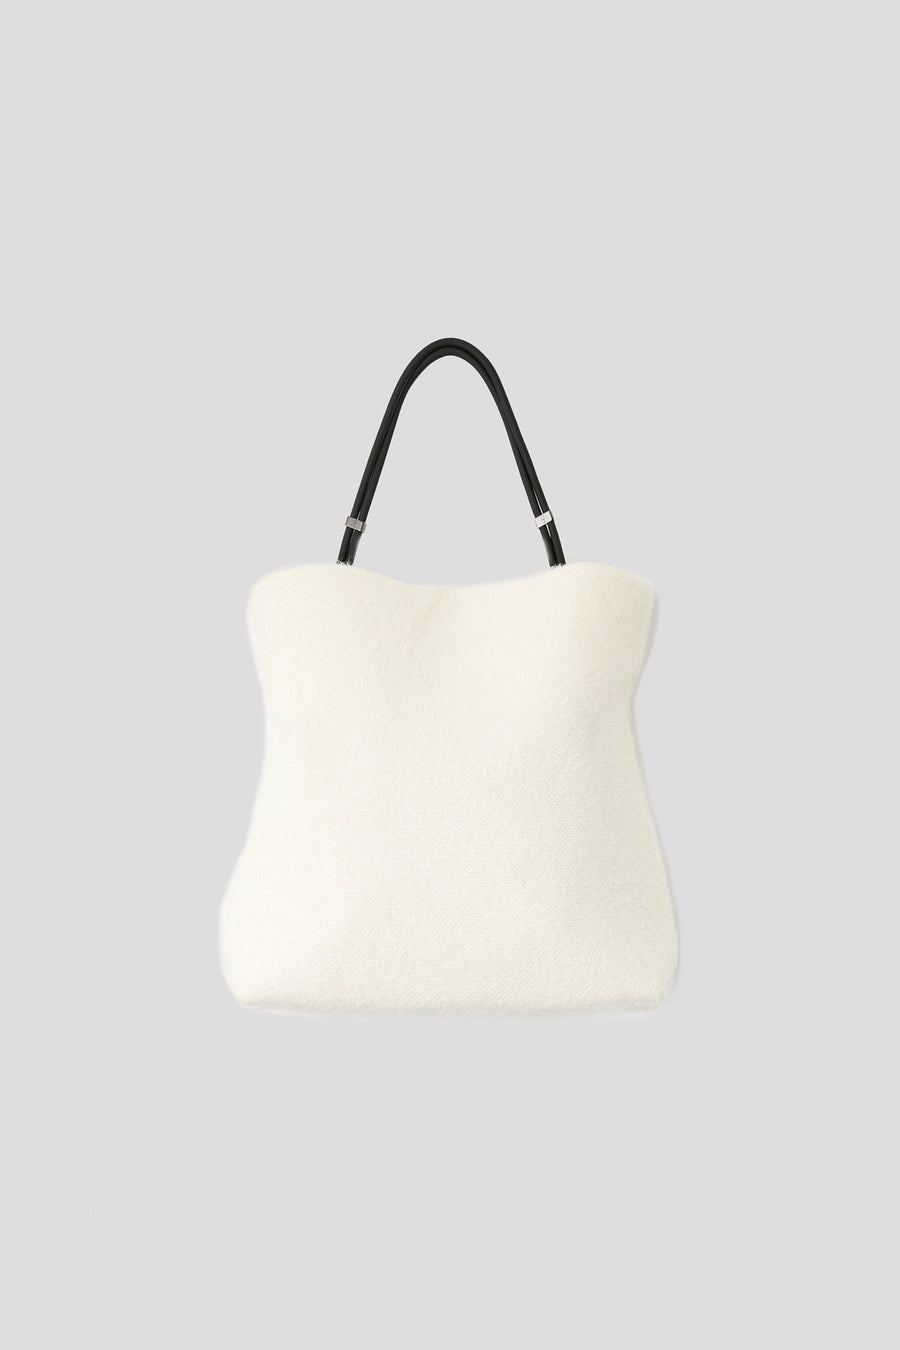 DOUGHY LUXE TOTE BAG